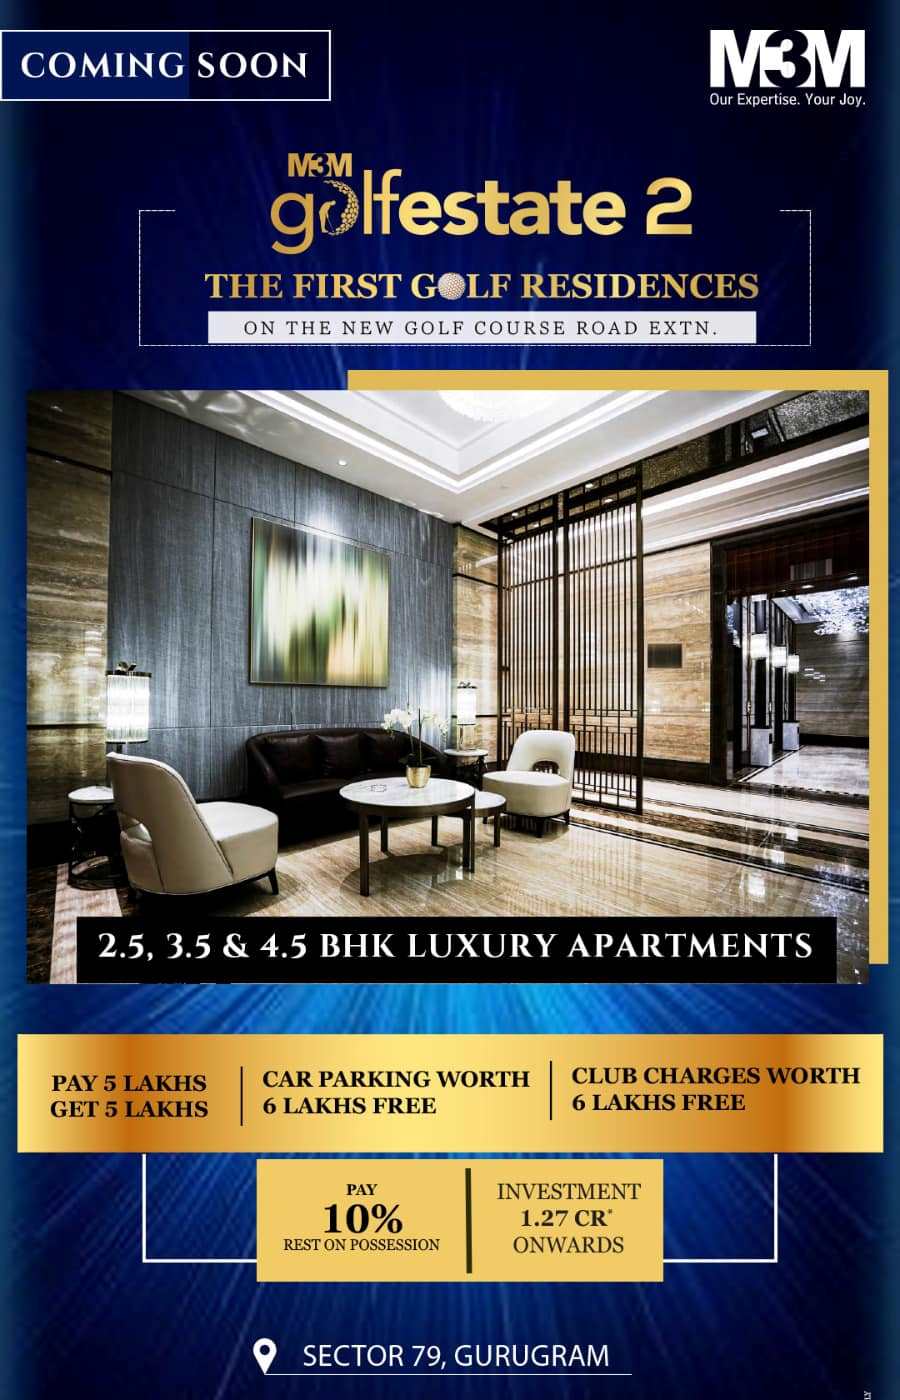 After the success of M3m Golf Estate M3m Presents its flagship project at Golf Estate 2.0, Gurgaon